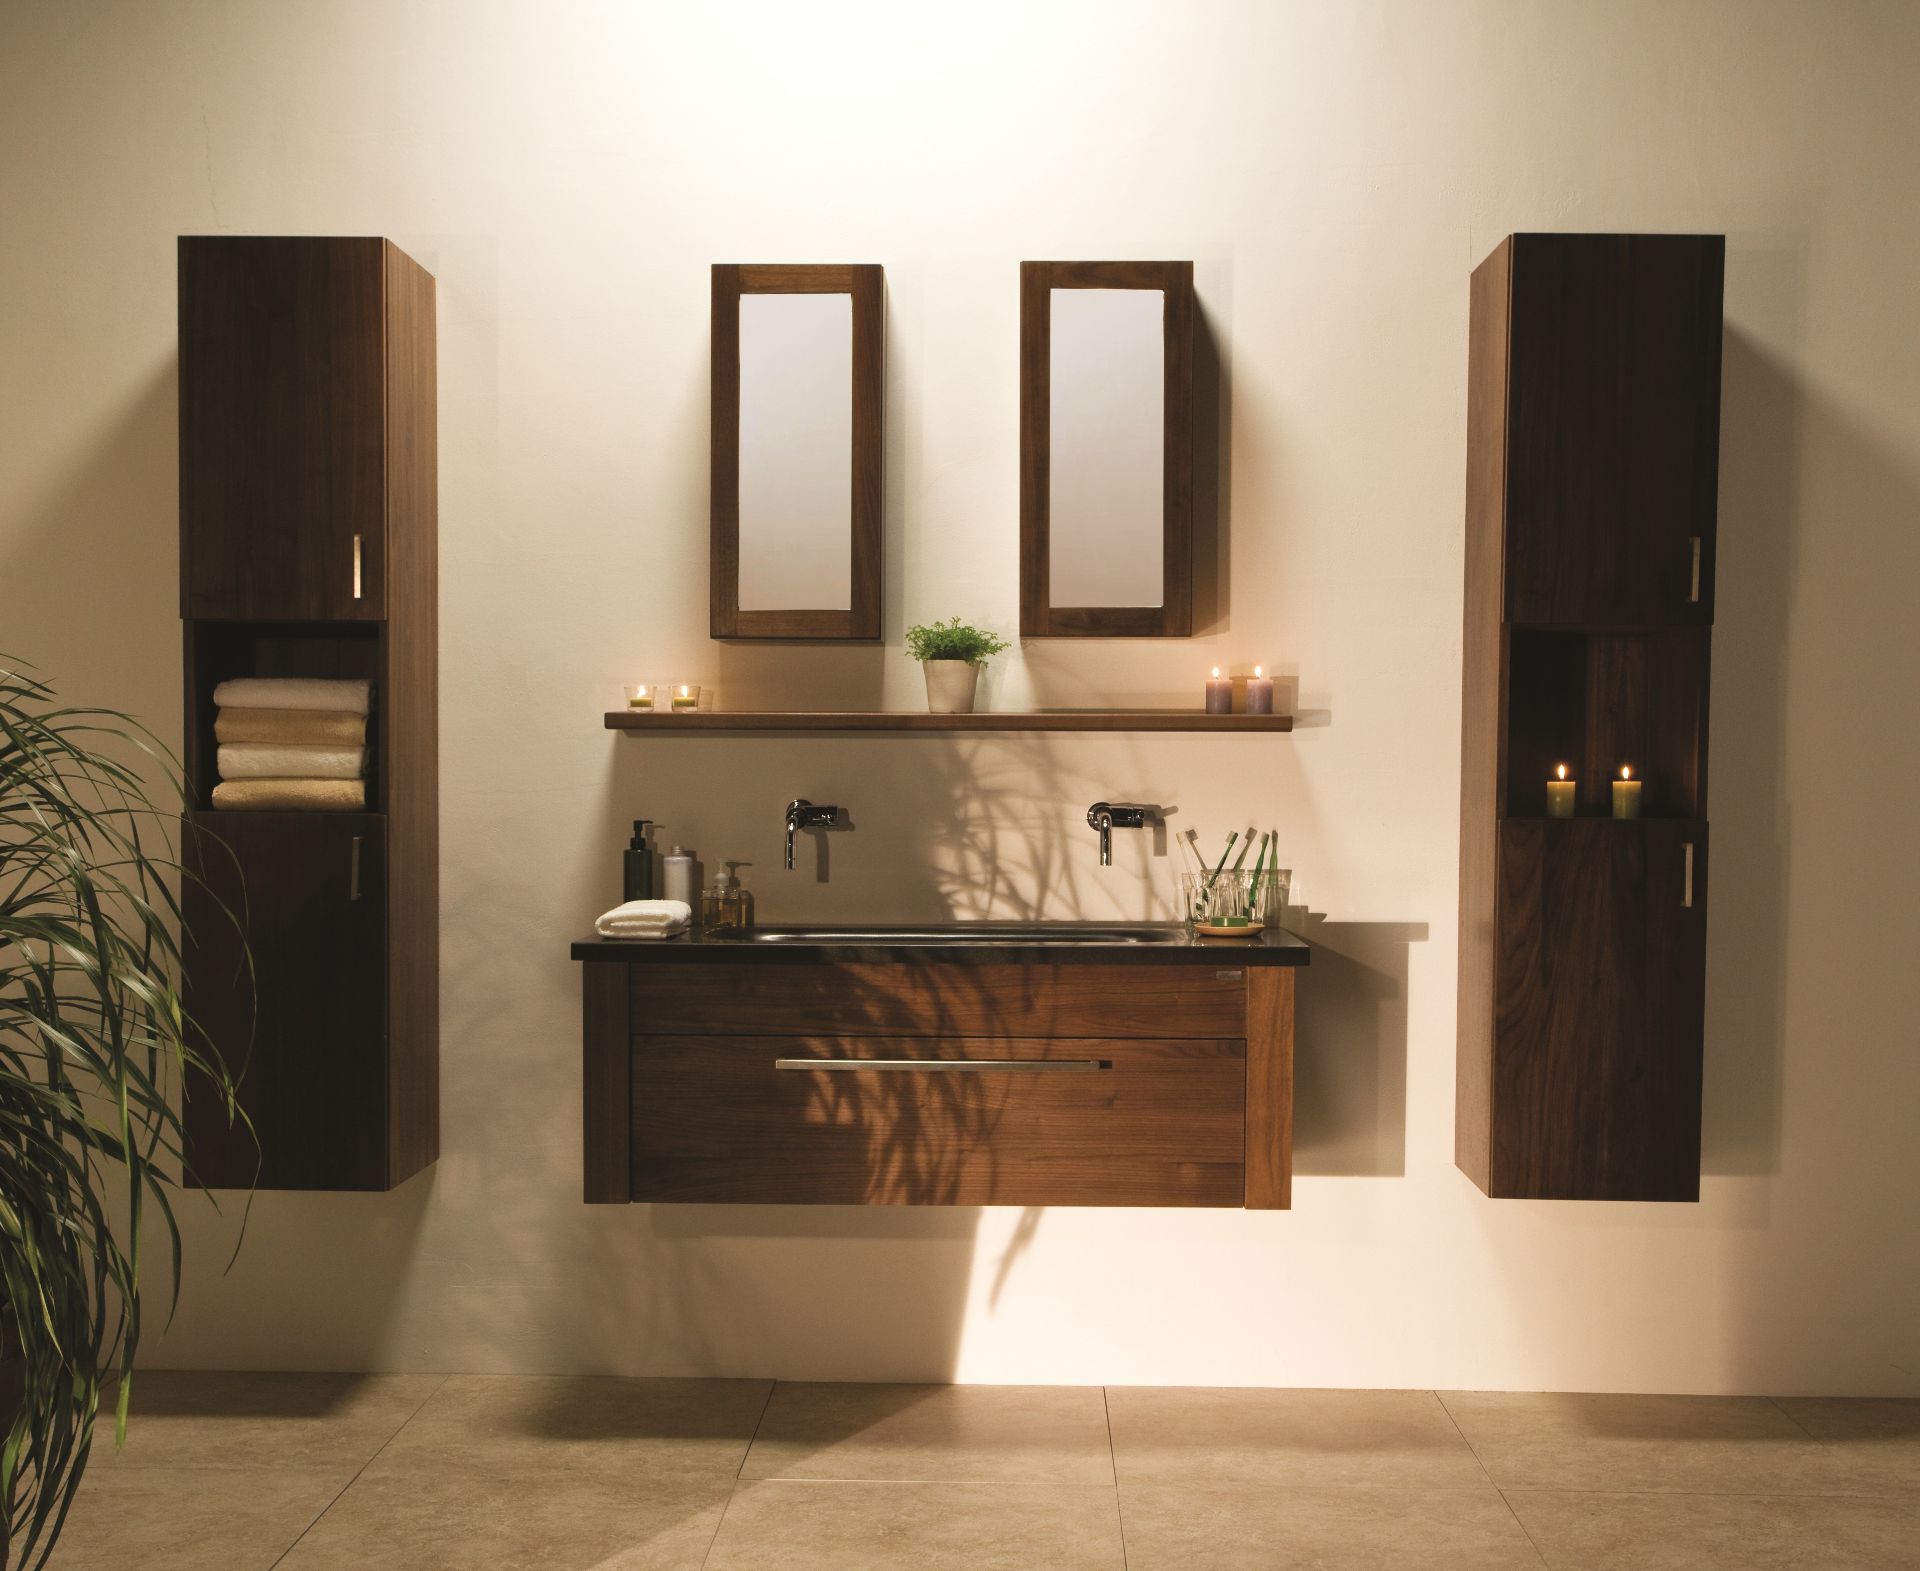 1 x Stonearth 'Venice' Wall Mounted 1200mm Washstand - American Solid Walnut - Original RRP £1,270 - Image 2 of 9